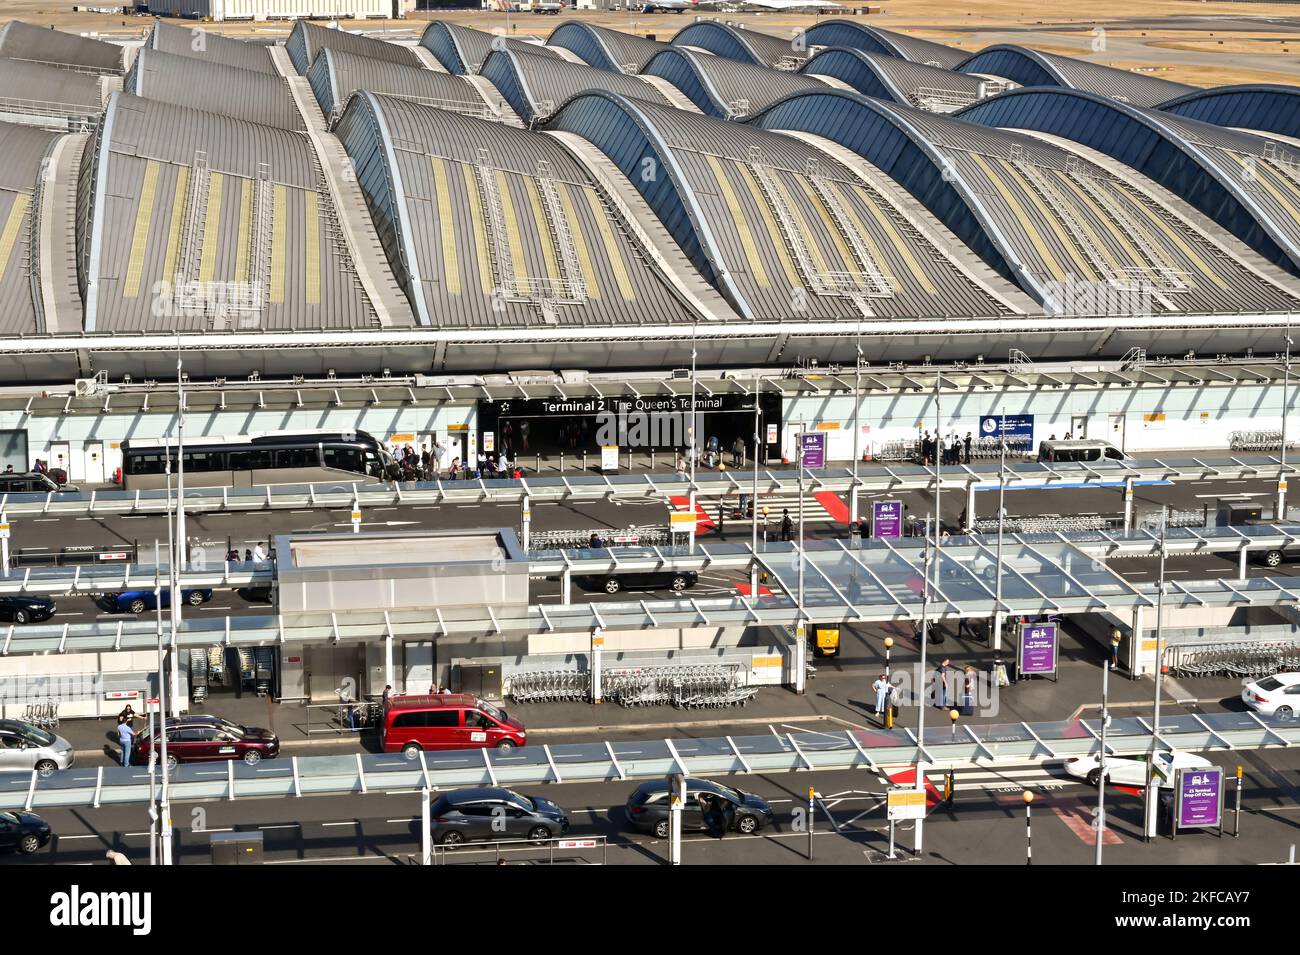 London, England - August 2022: Aerial view of the drop off zone and entrance to Terminal 2, The Queen's Terminal, at London Heathrow airport Stock Photo